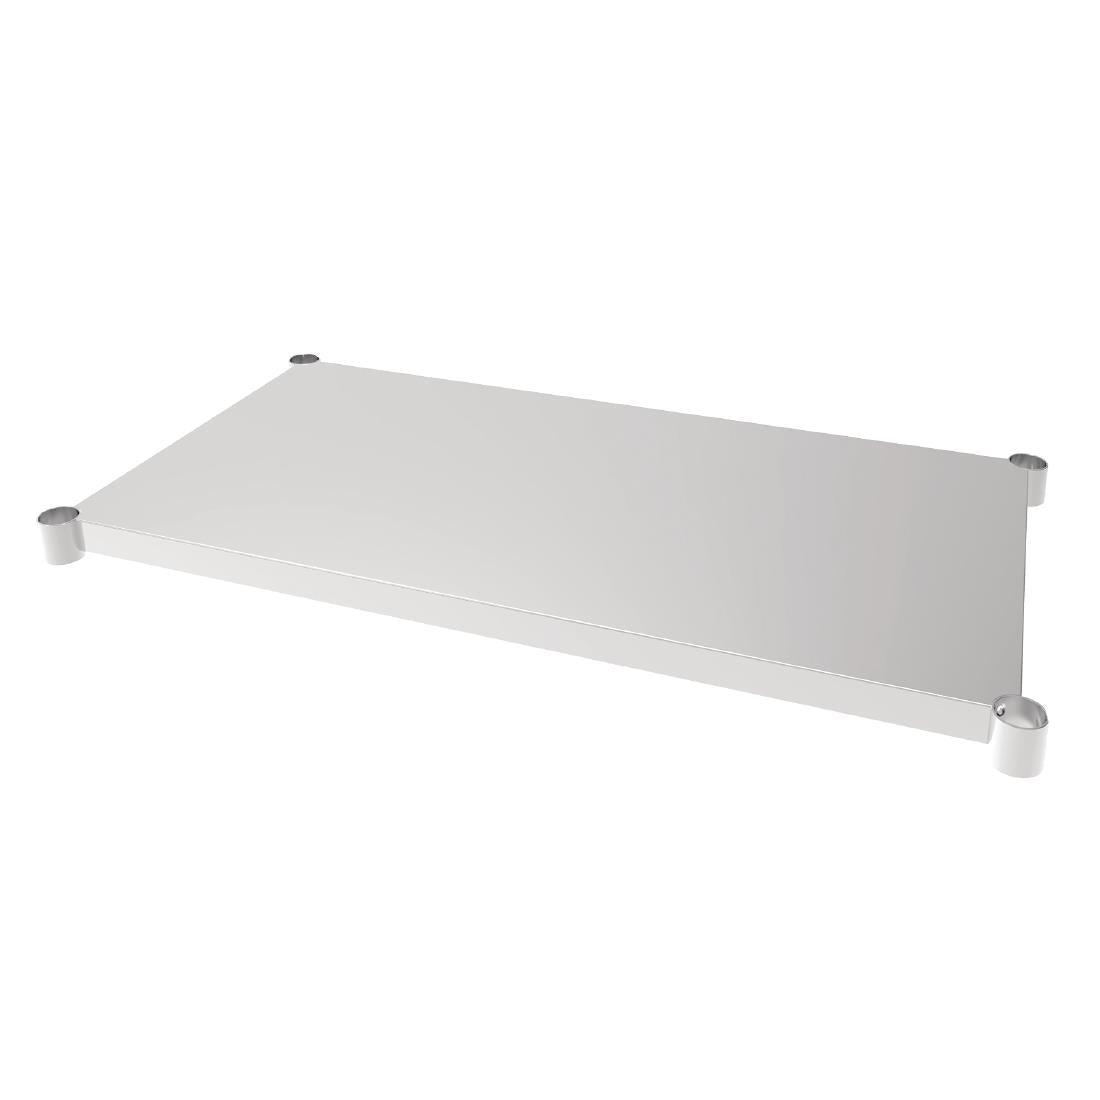 CP837 Vogue Steel Table Shelf 1200x700mm JD Catering Equipment Solutions Ltd